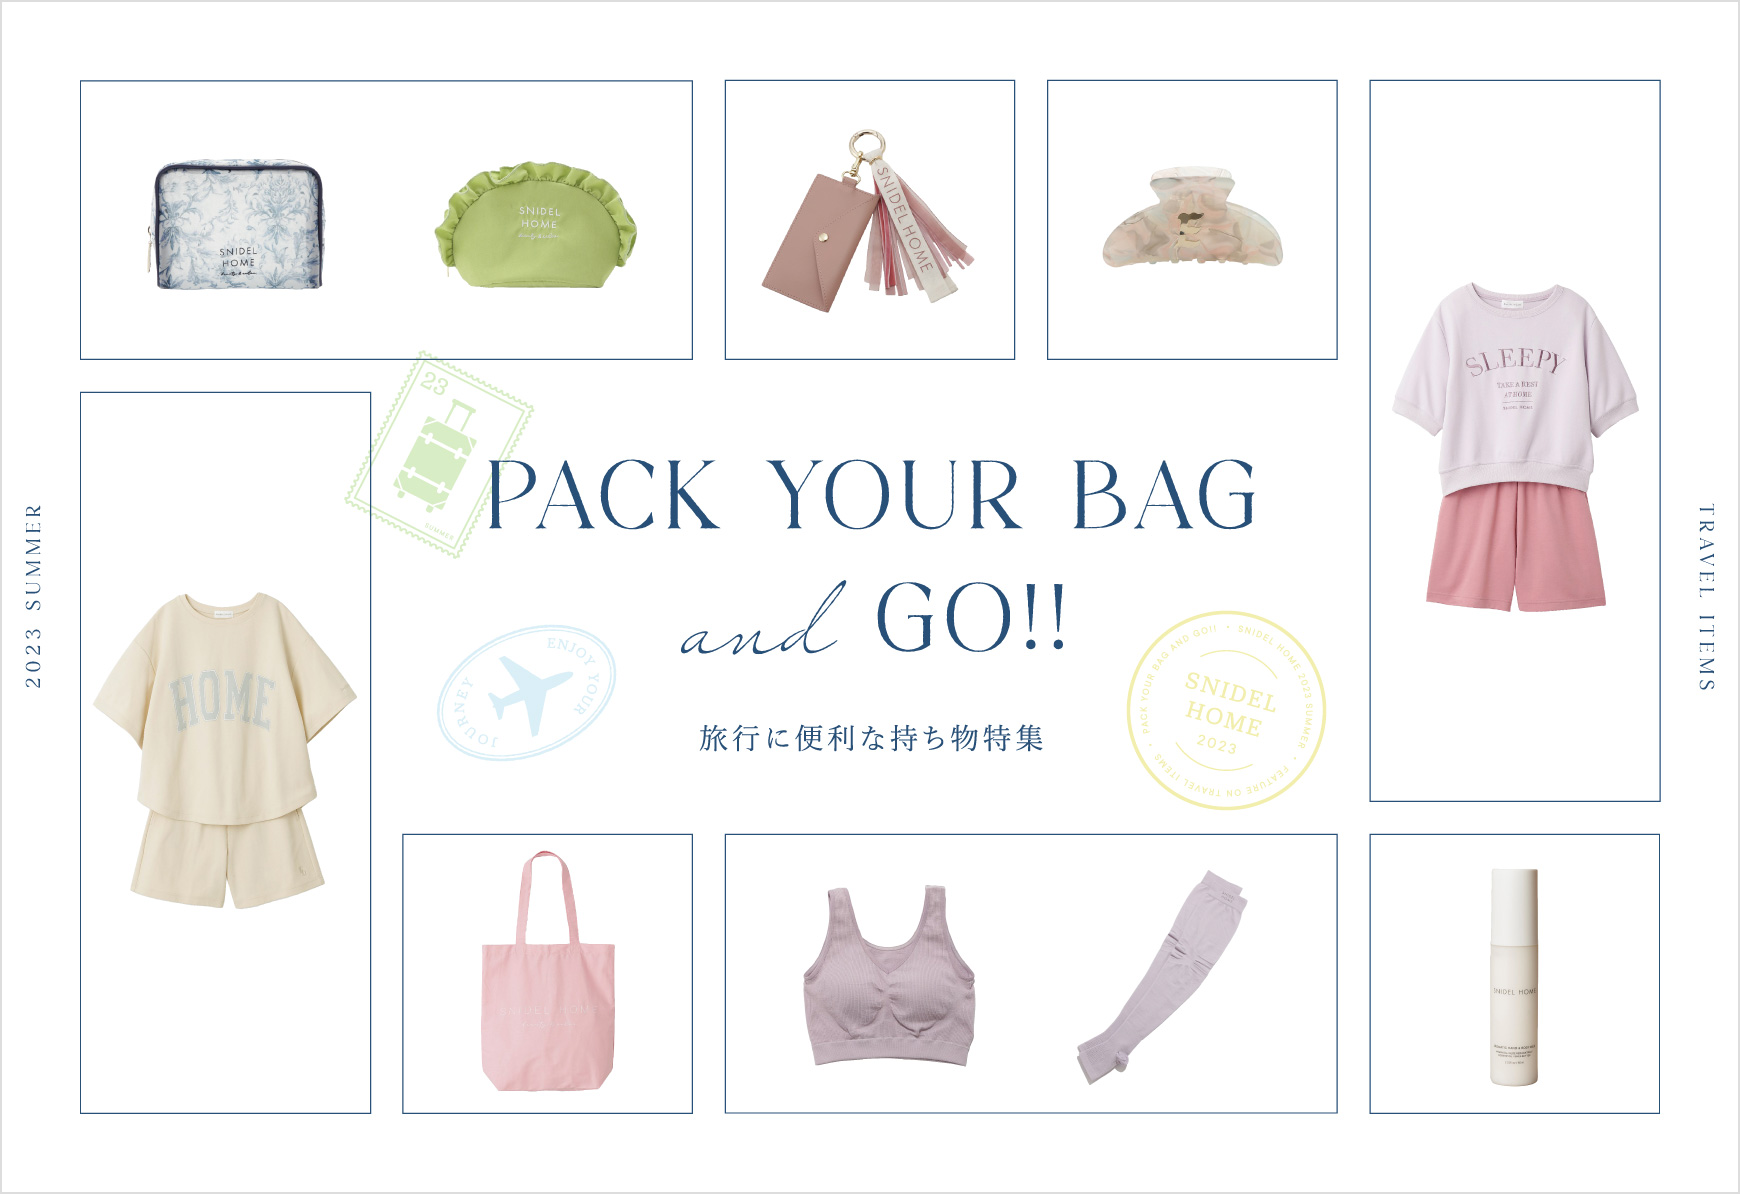 PACK YOUR BAG and GO!! 旅行に便利な持ち物特集